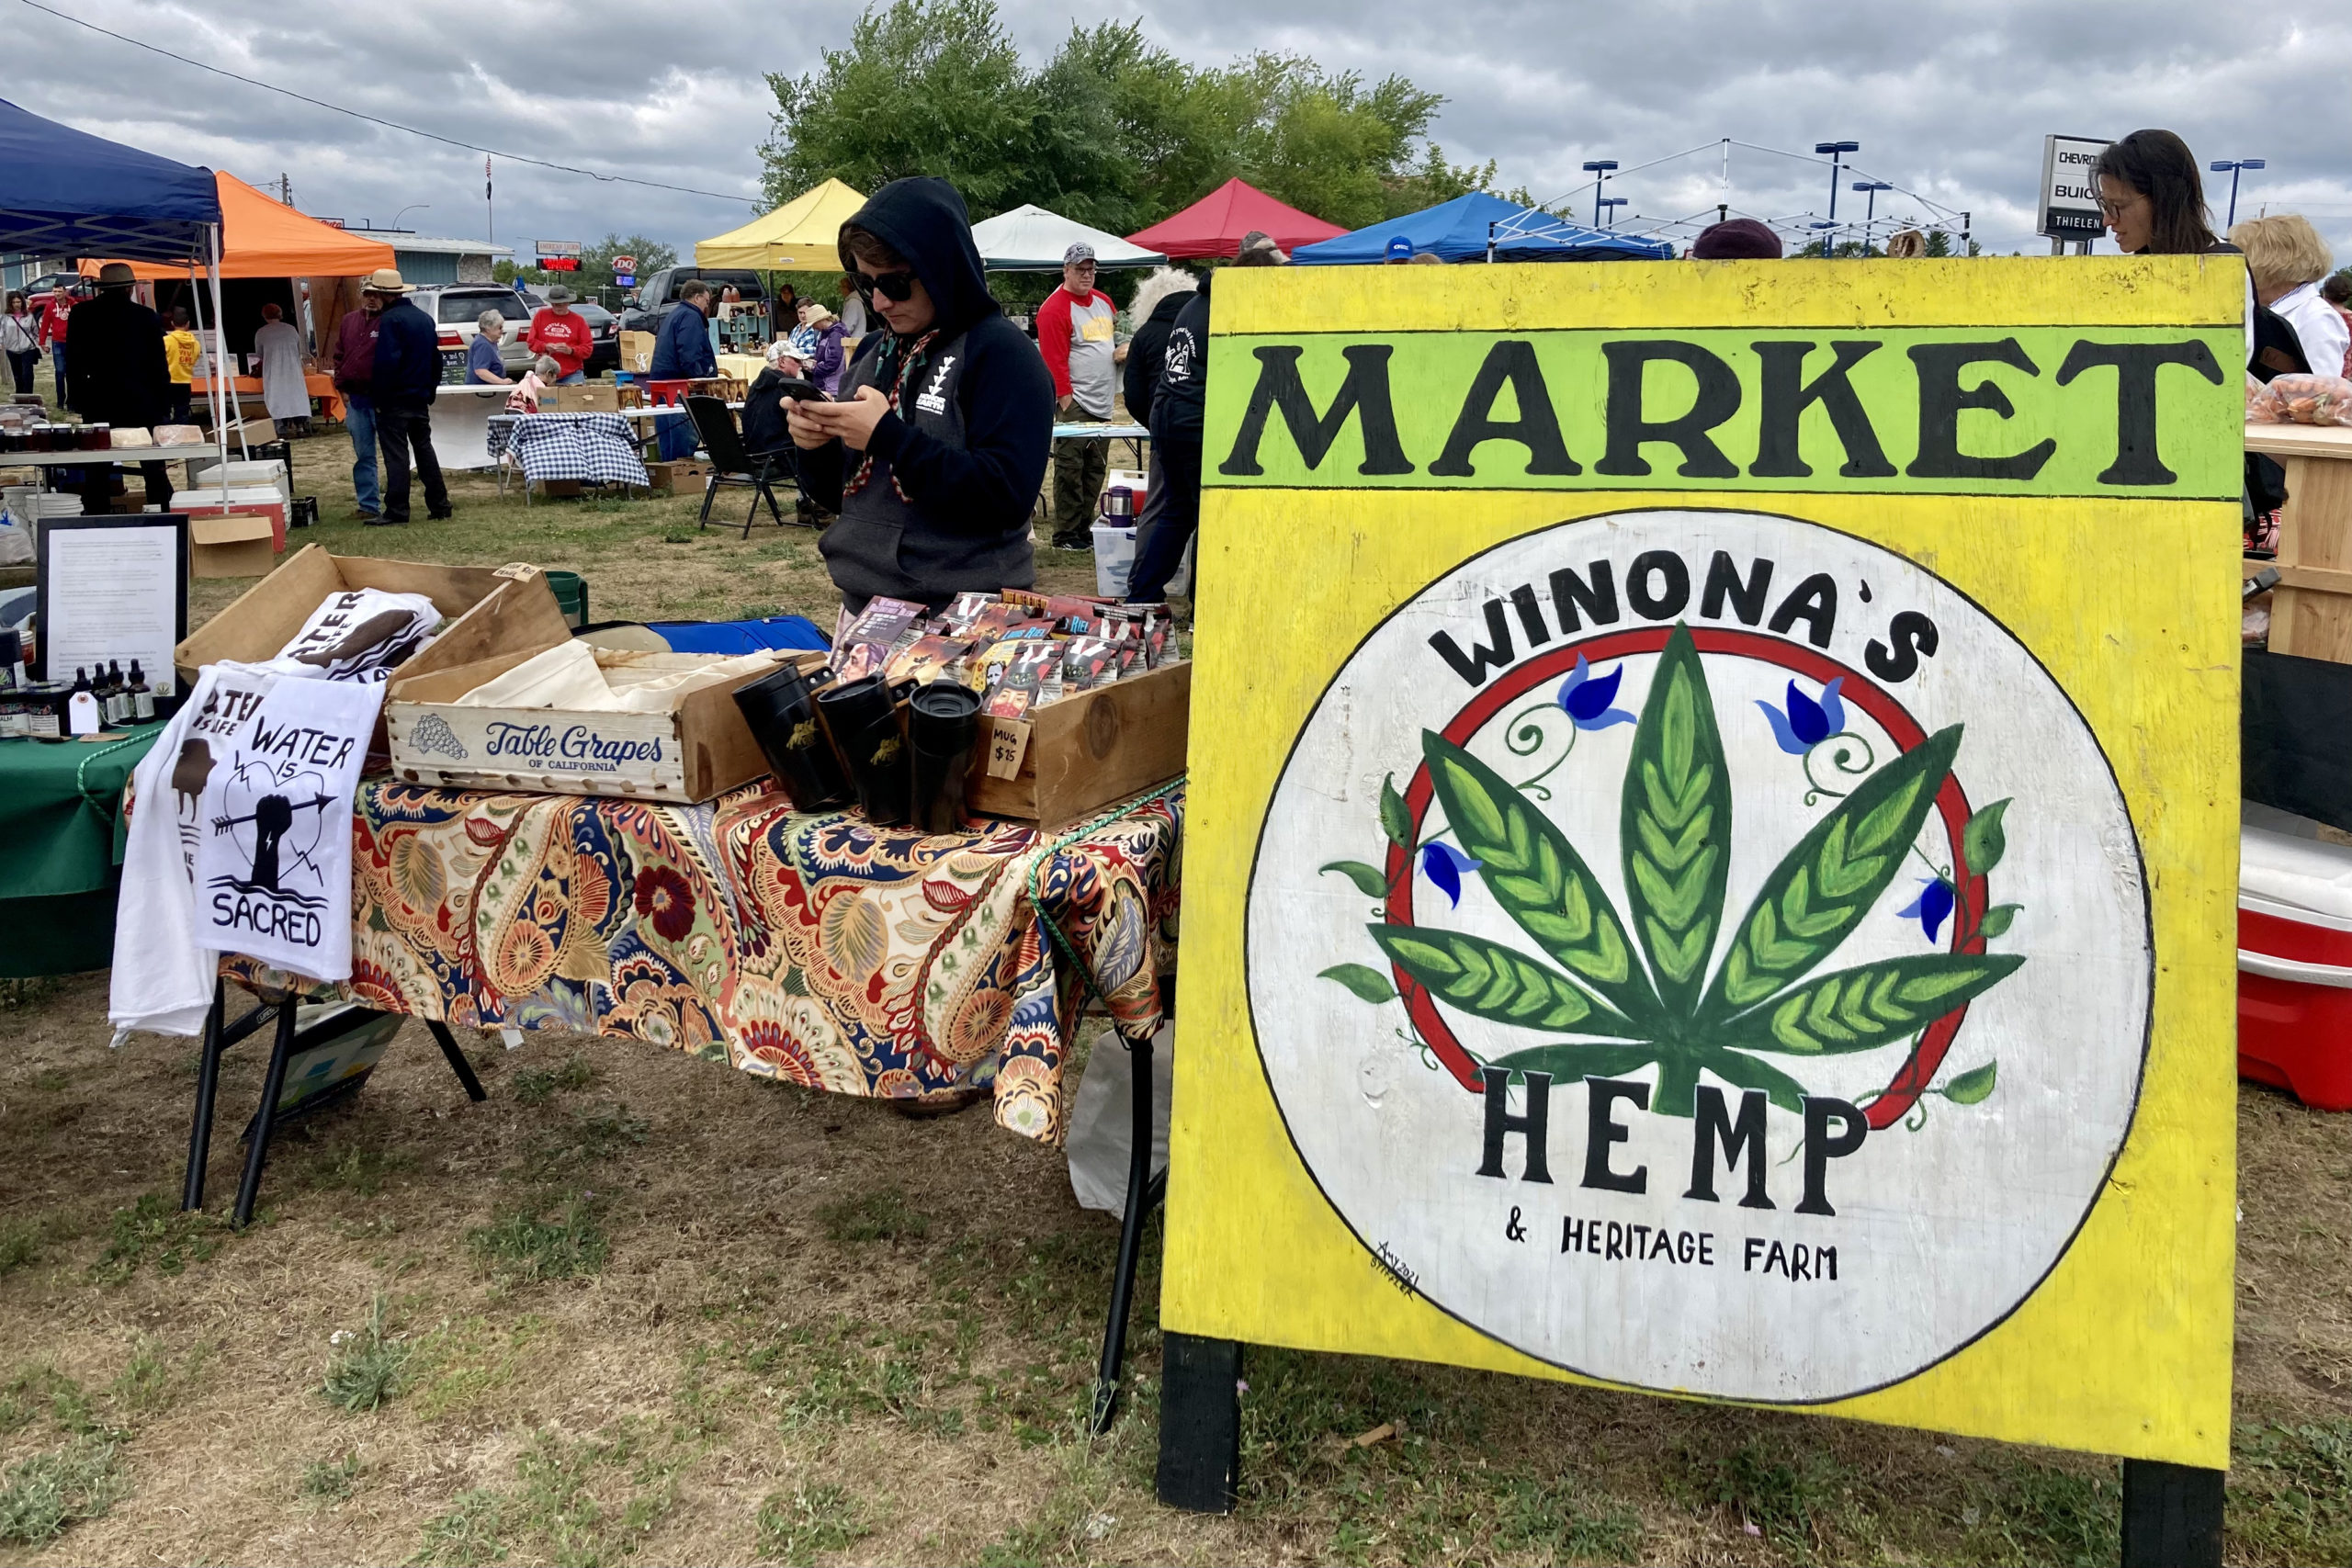 Honor the Earth is focus on building a just transition away from fossil fuels through tribal business development. Winona's Hemp & Heritage Farm grows hemp and other food, and distributes "pipeline free" wild rice harvested by Ojibwe people from the region. https://www.honorearth.org/green-newdeal